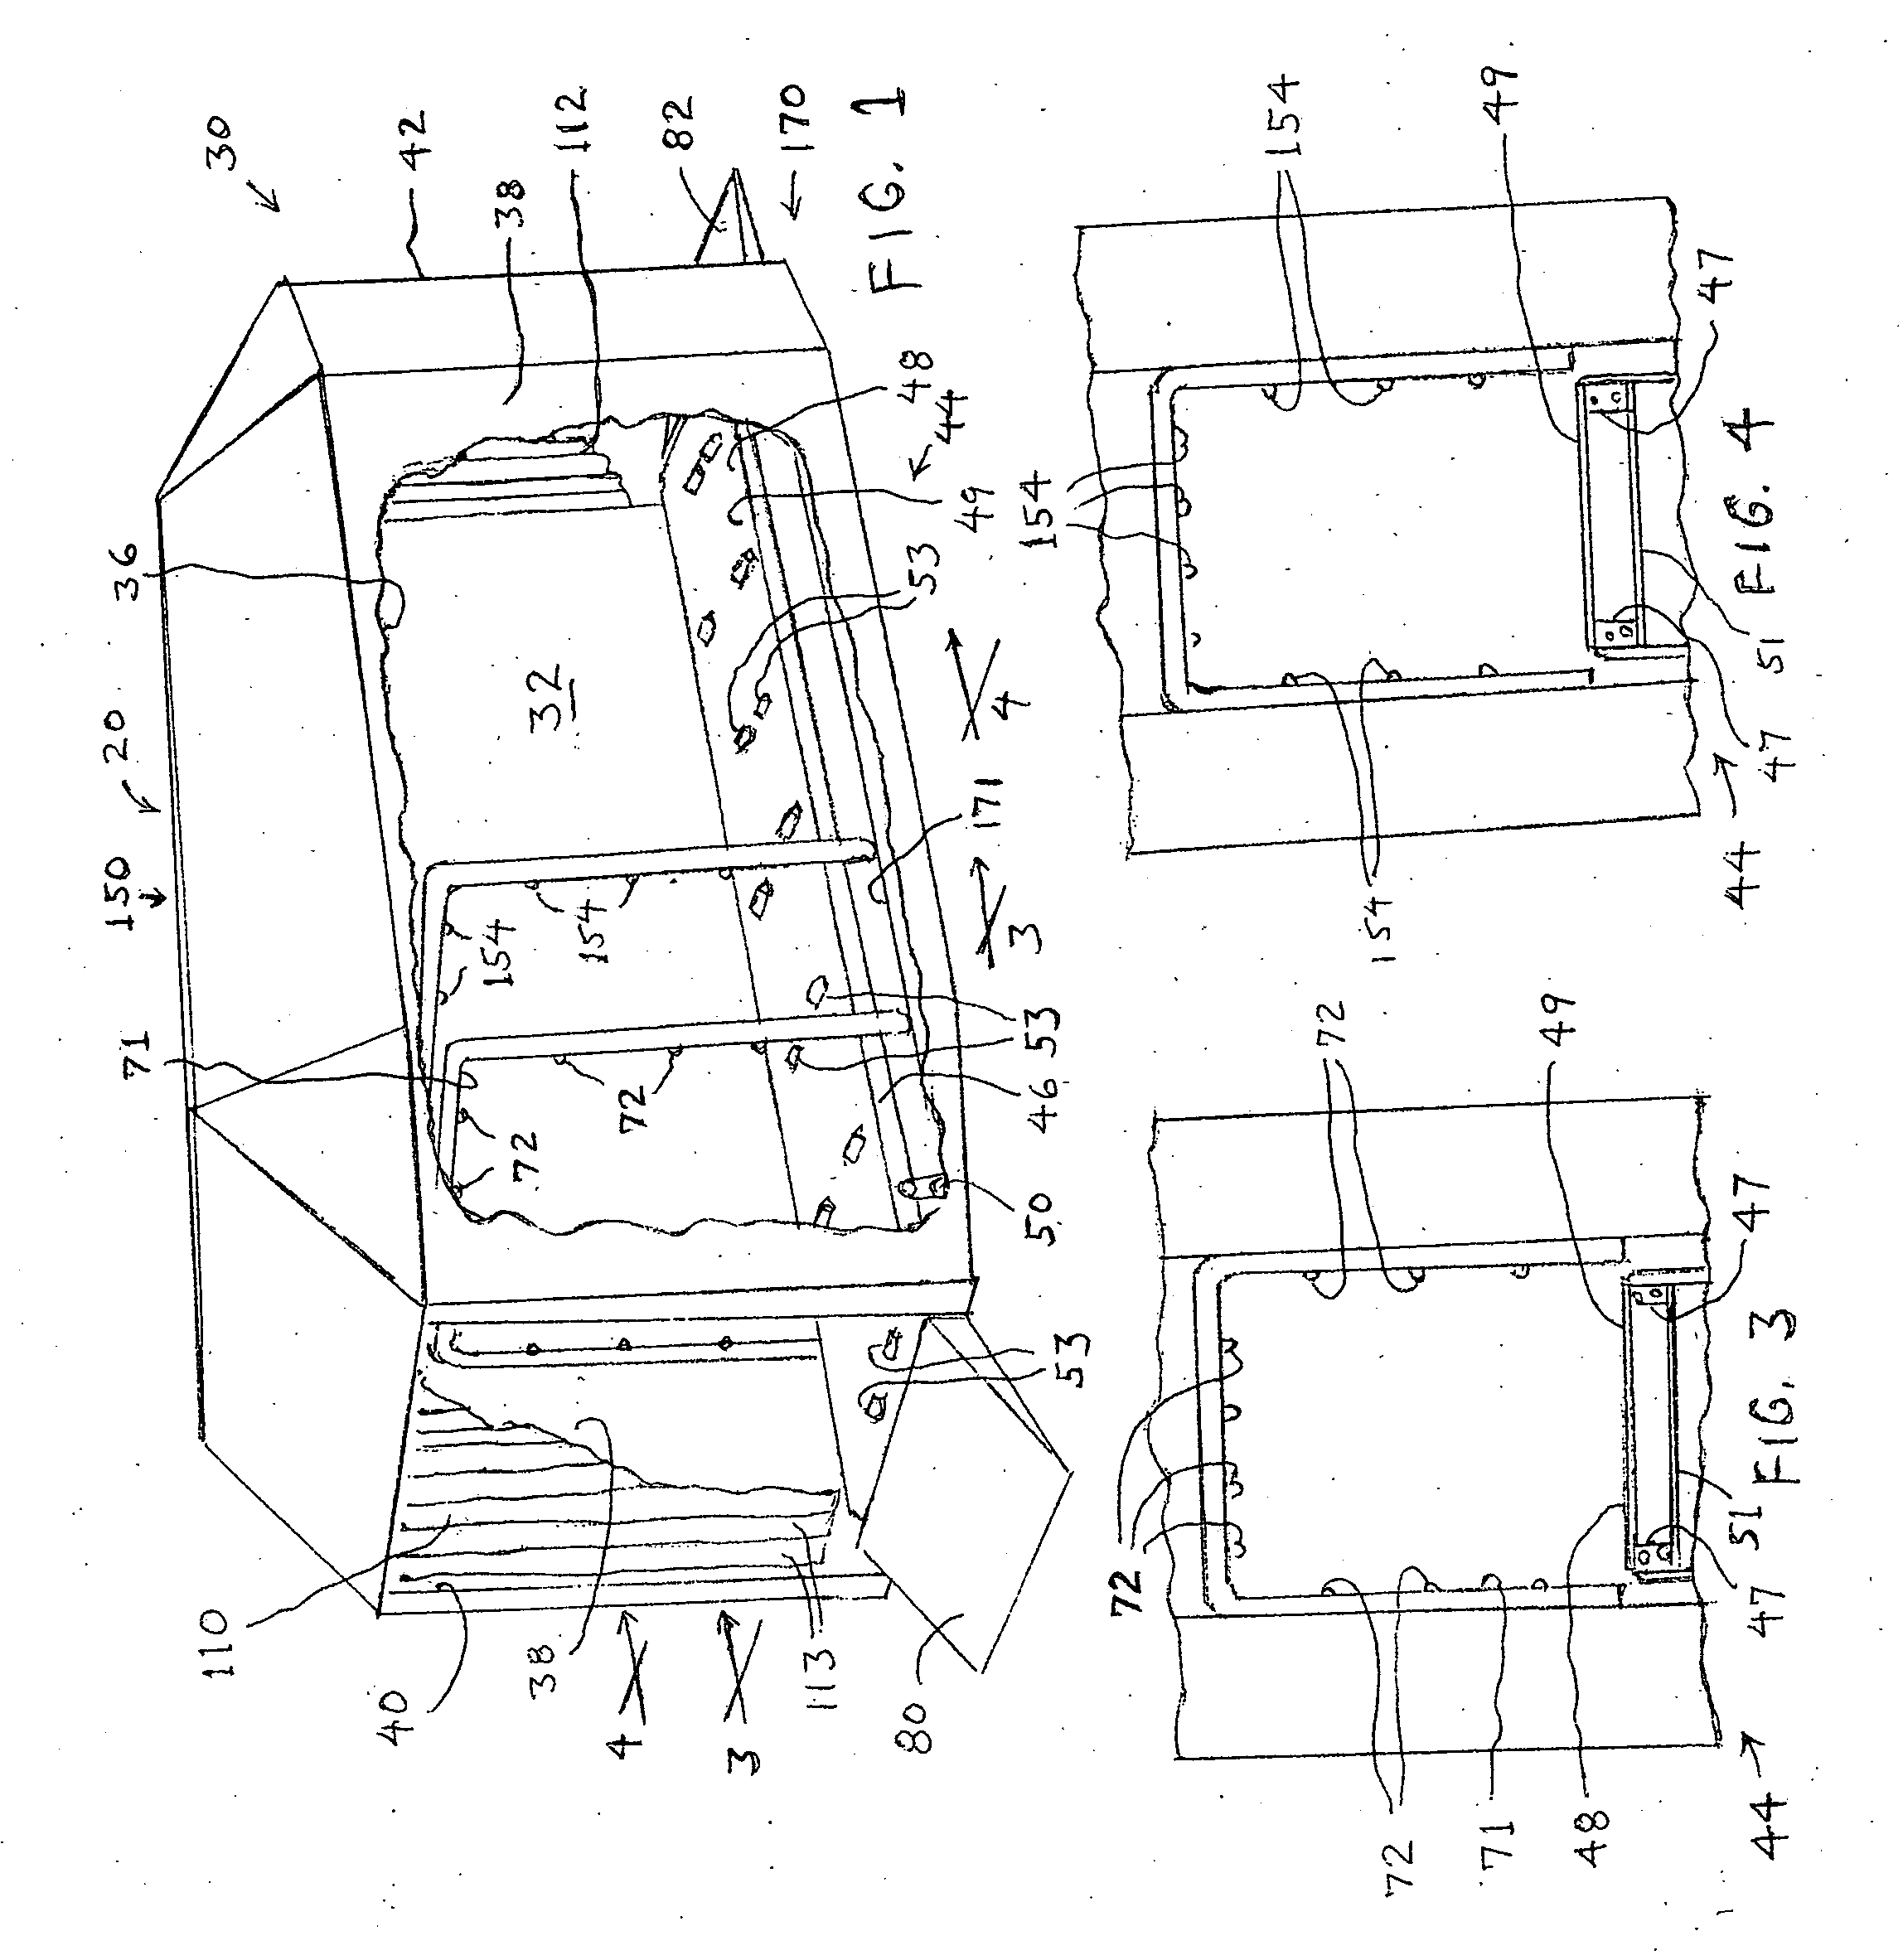 System and method for cleaning or sanitizing items intended for re-use